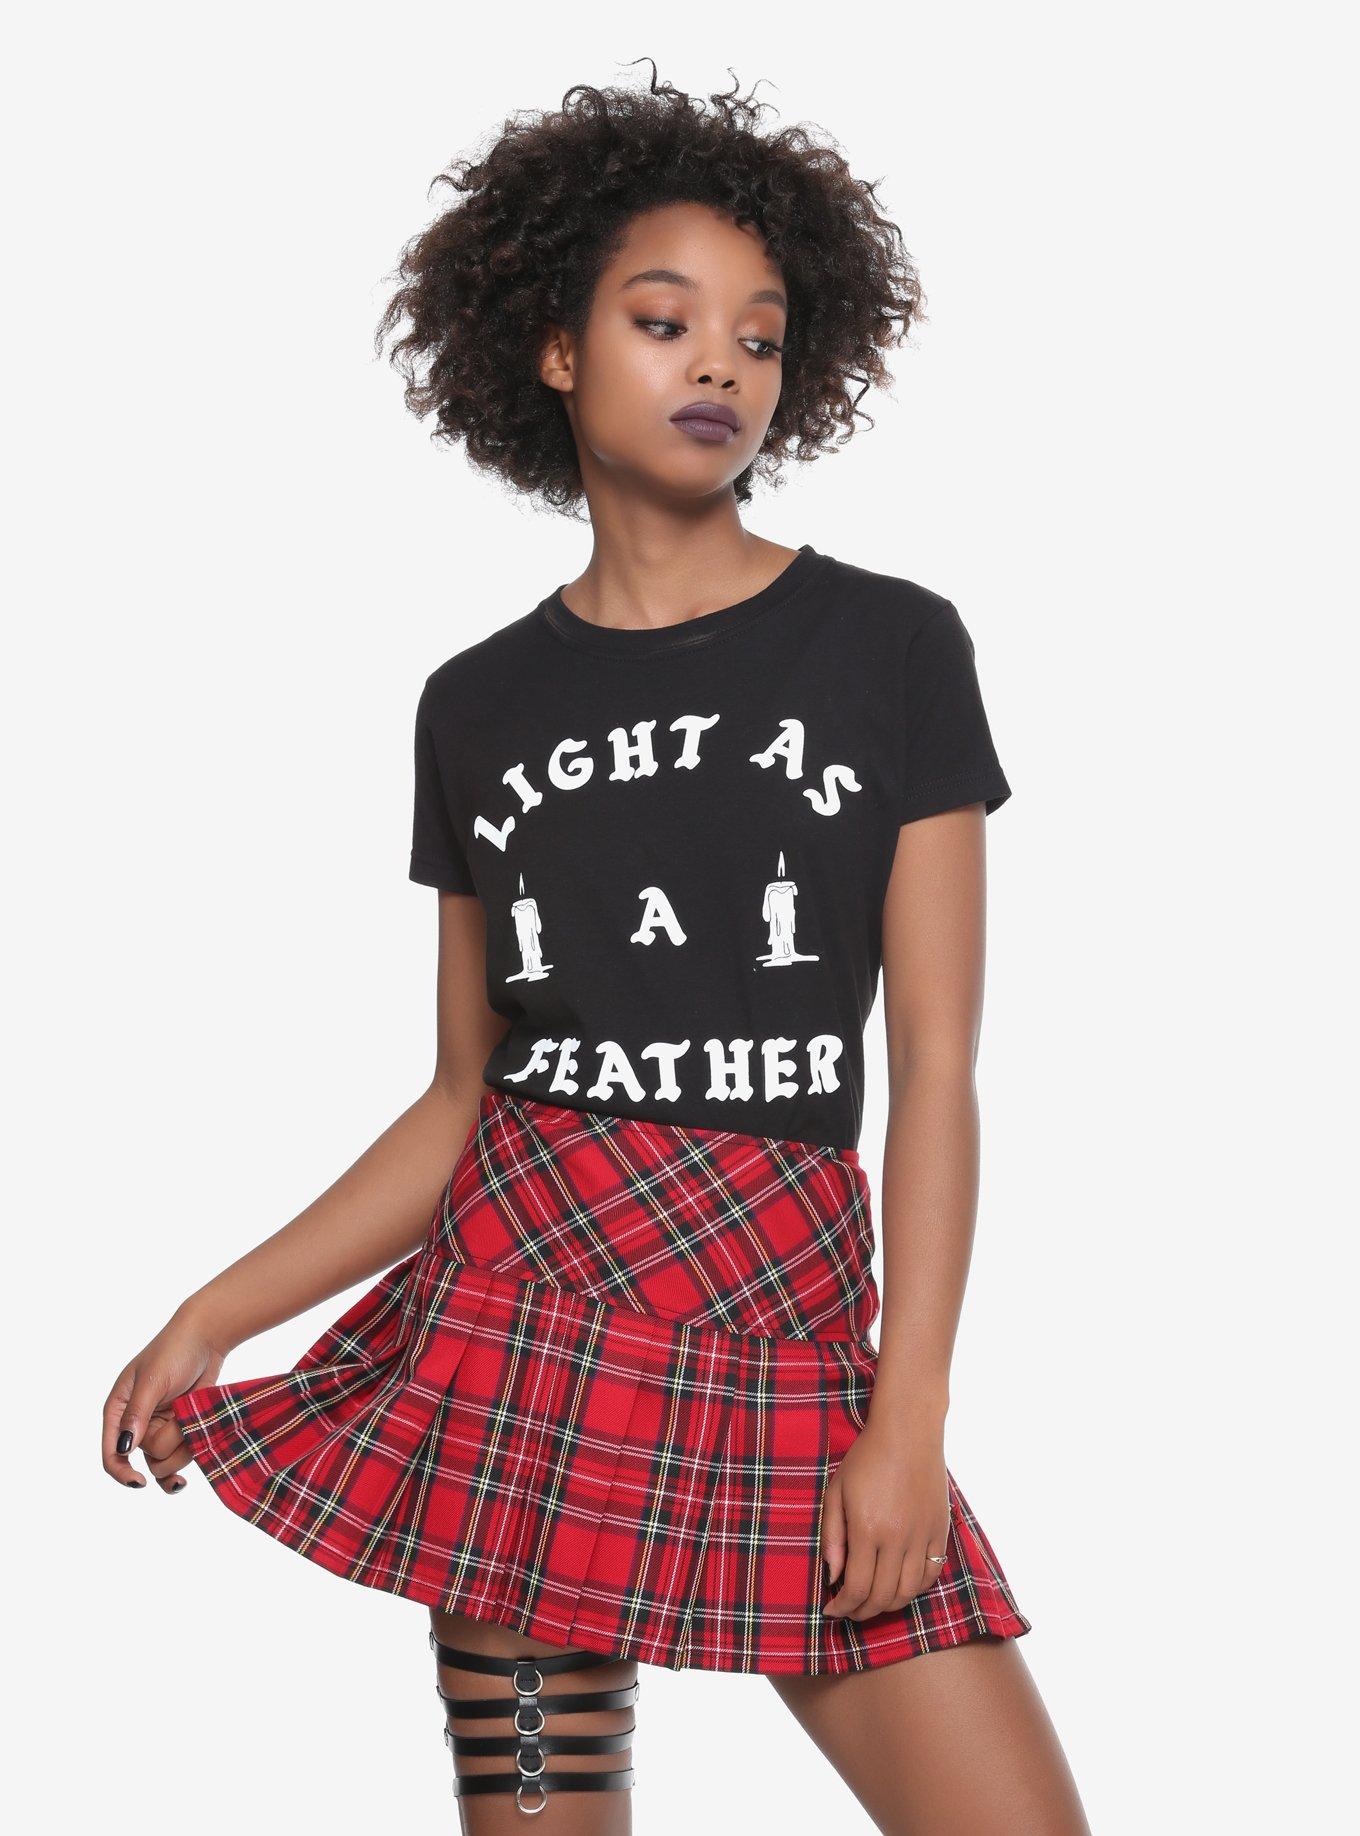 The Craft Light As A Feather Girls T-Shirt, WHITE, hi-res